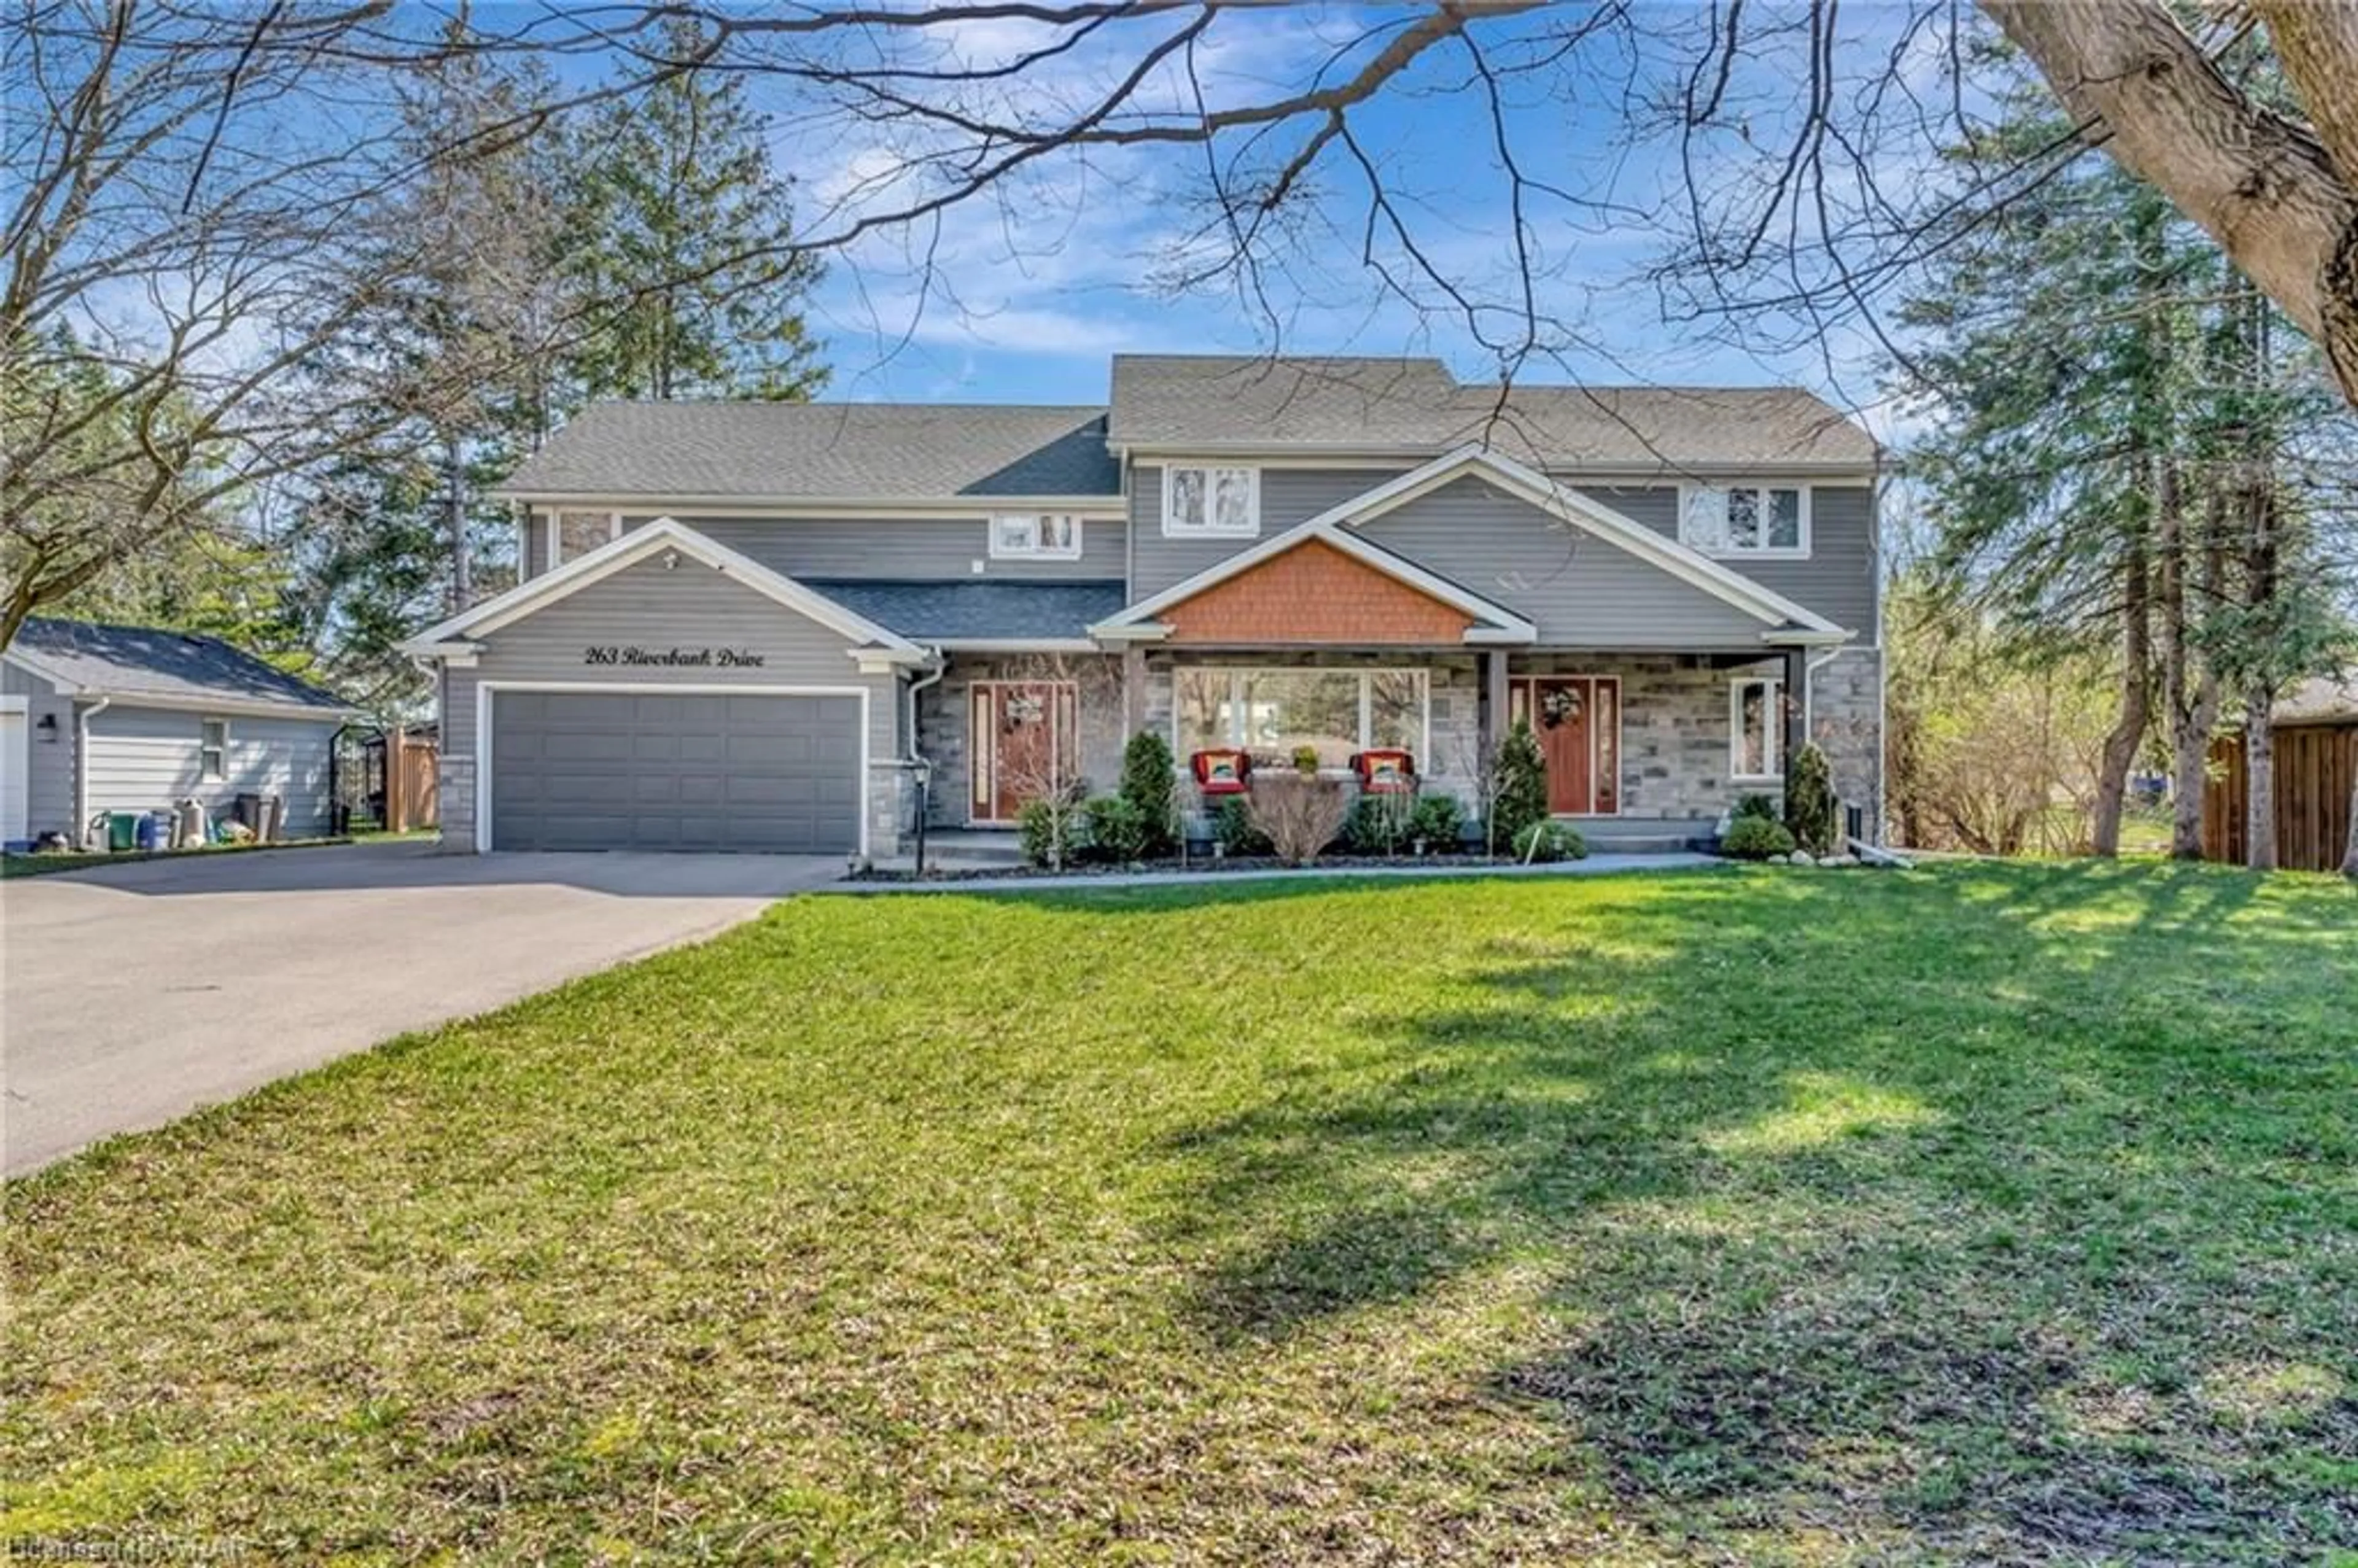 Frontside or backside of a home for 263 Riverbank Dr, Cambridge Ontario N3H 4R6